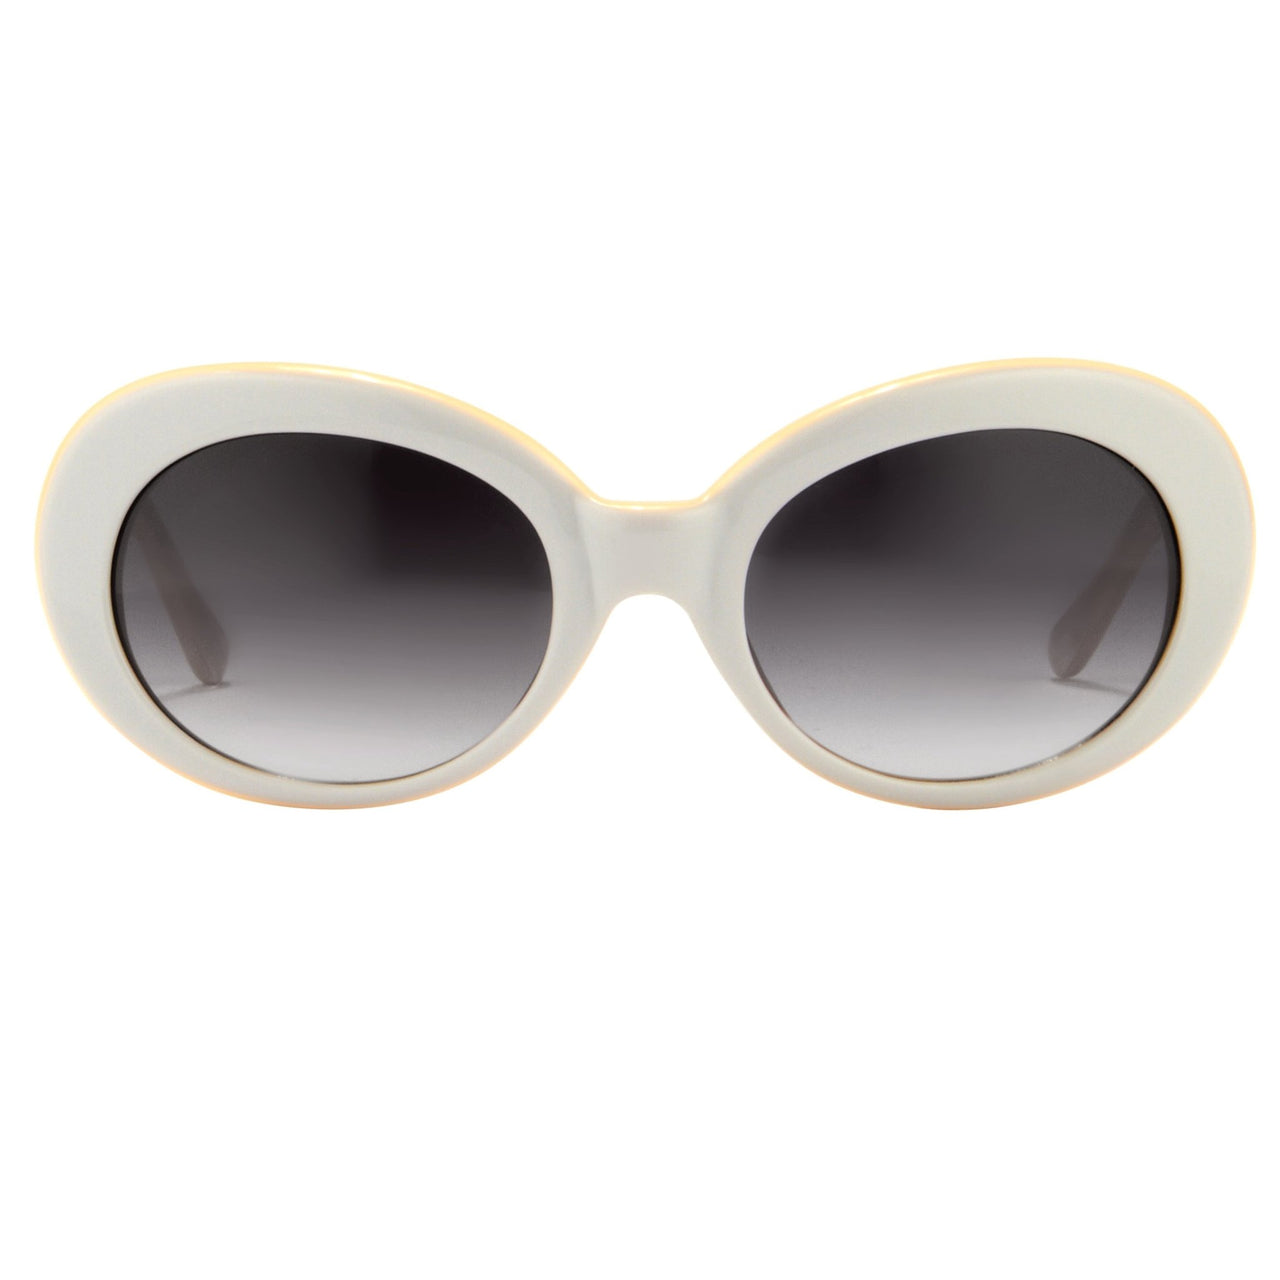 Agent Provocateur Women Sunglasses Oval Grey/Apricot and Grey Lenses Category 3 - AP64C3SUN - Watches & Crystals